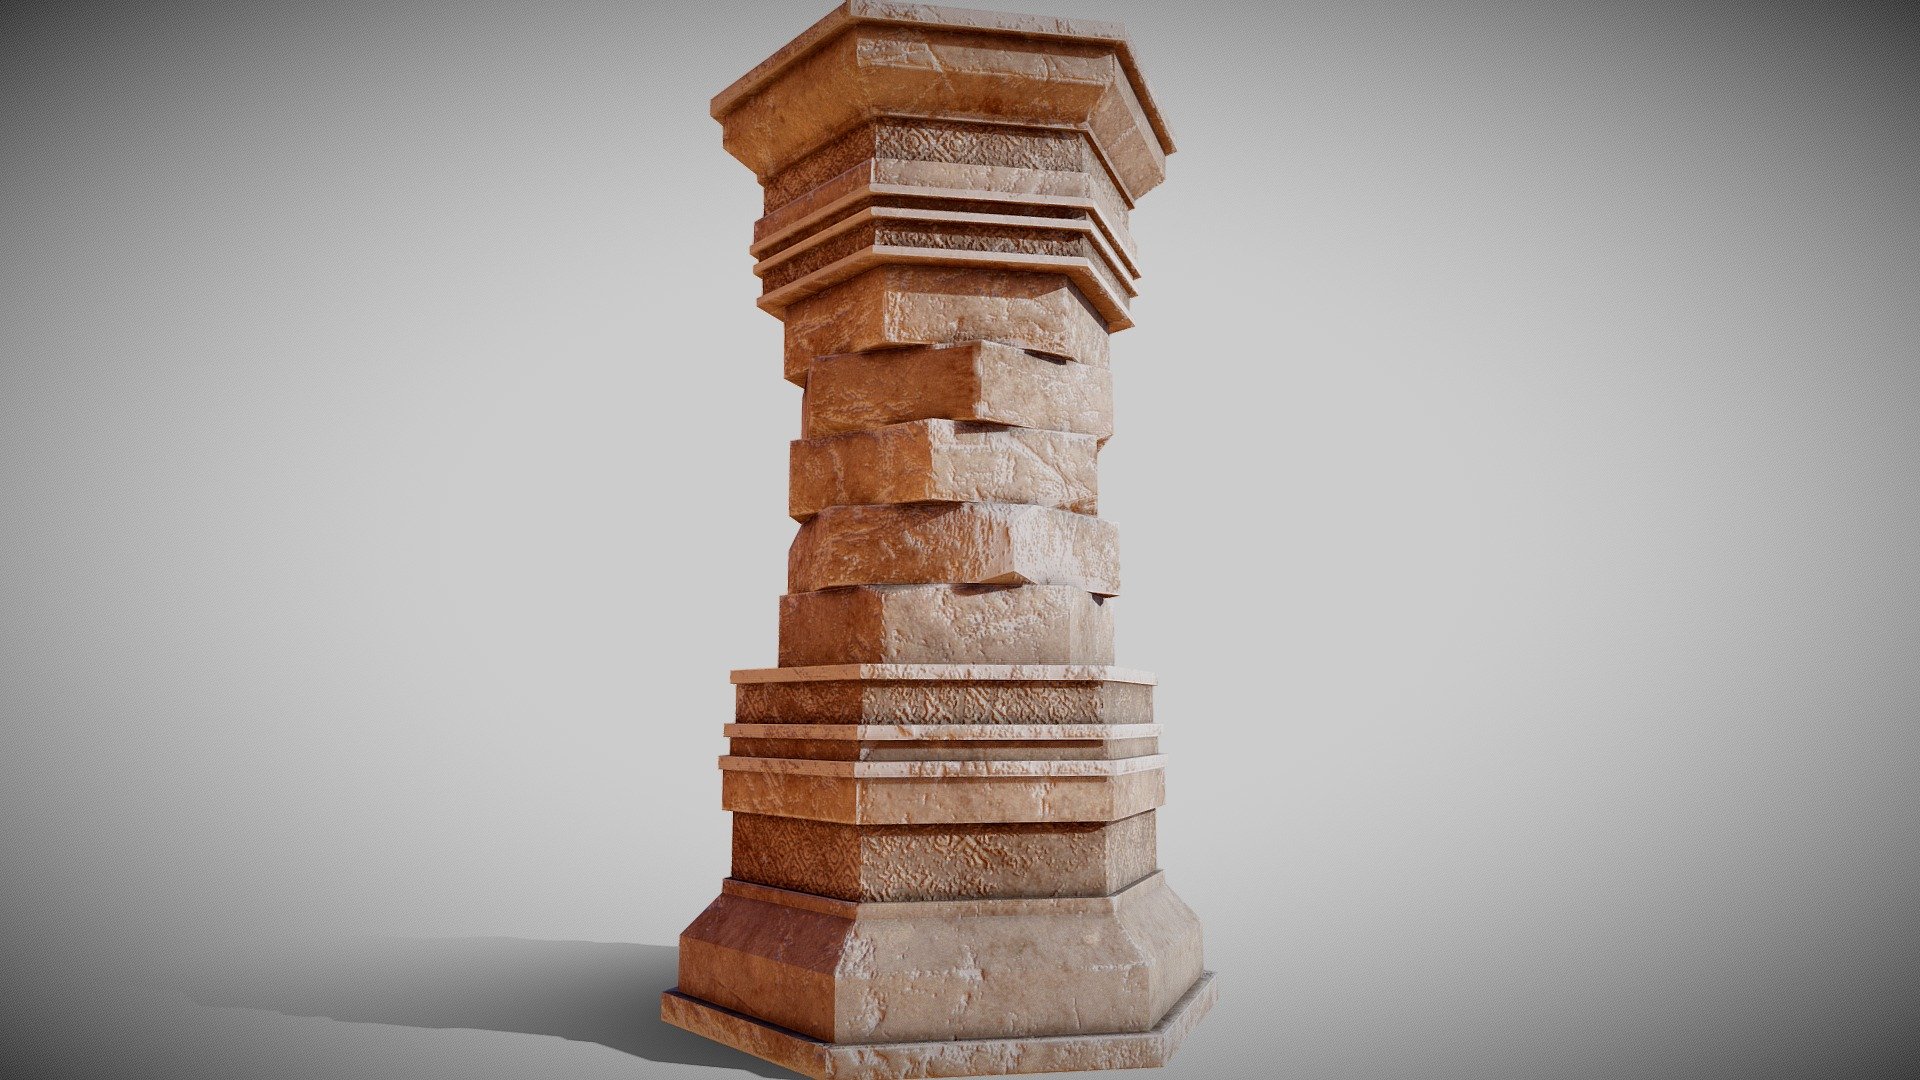 I saw a similar pillar in a video for Elyon A:IR, and thought I'd make something like it.

Modeled in Blender and textured in Substance Painter 3d model